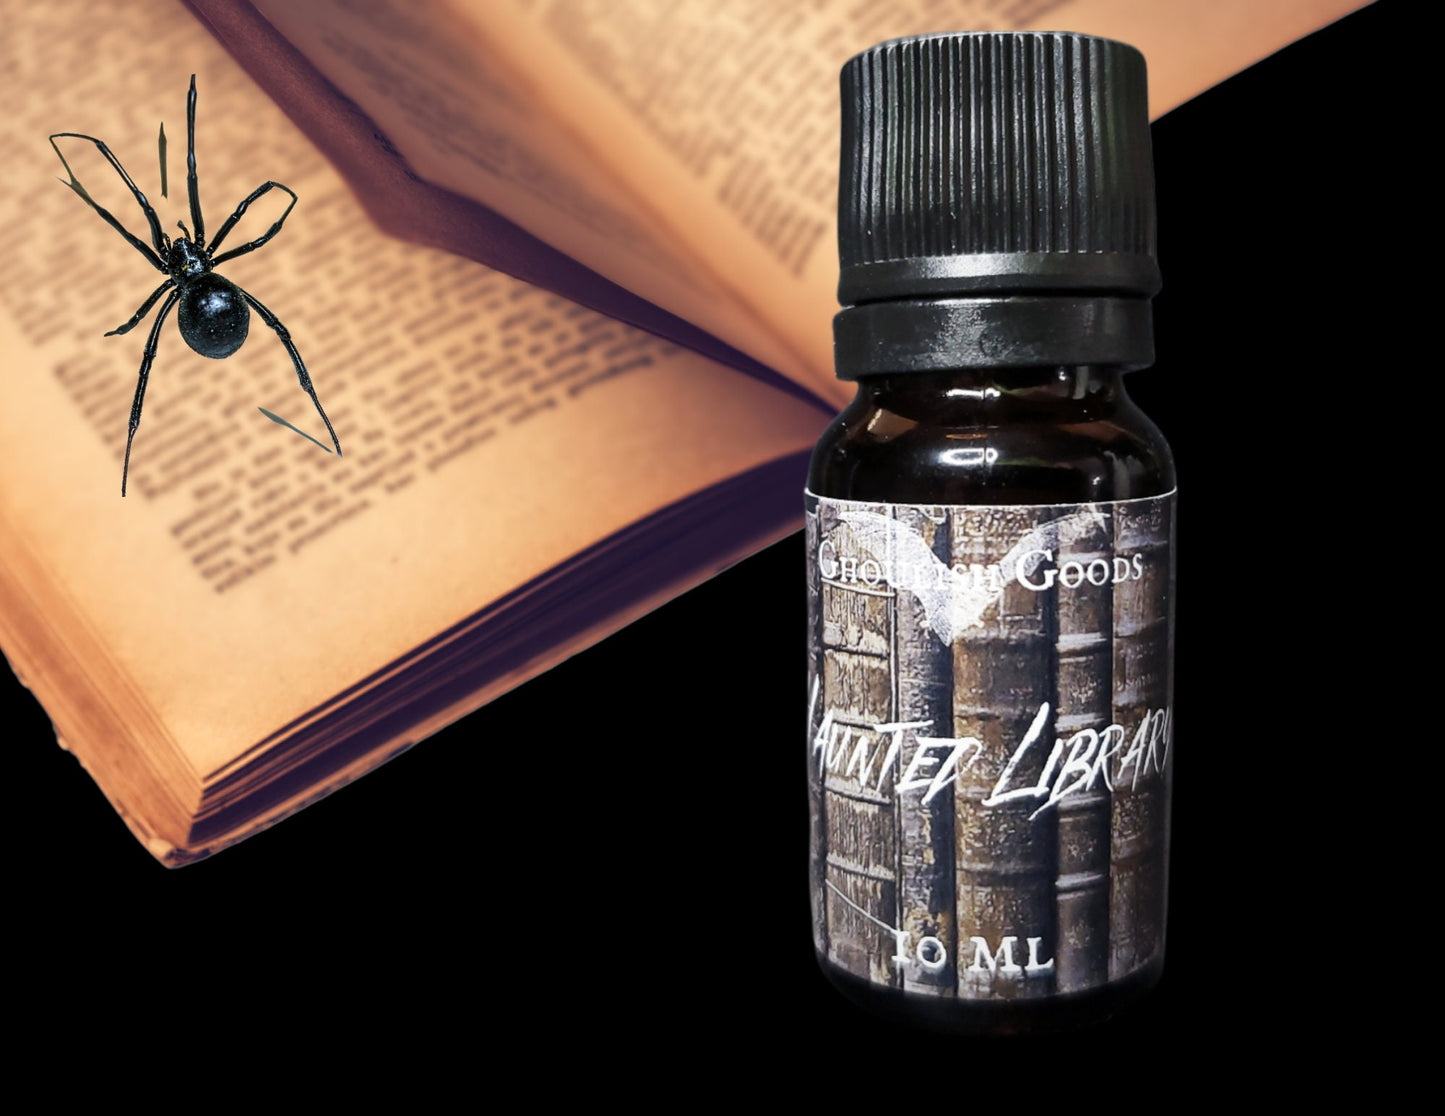 Haunted Library Perfume Oil